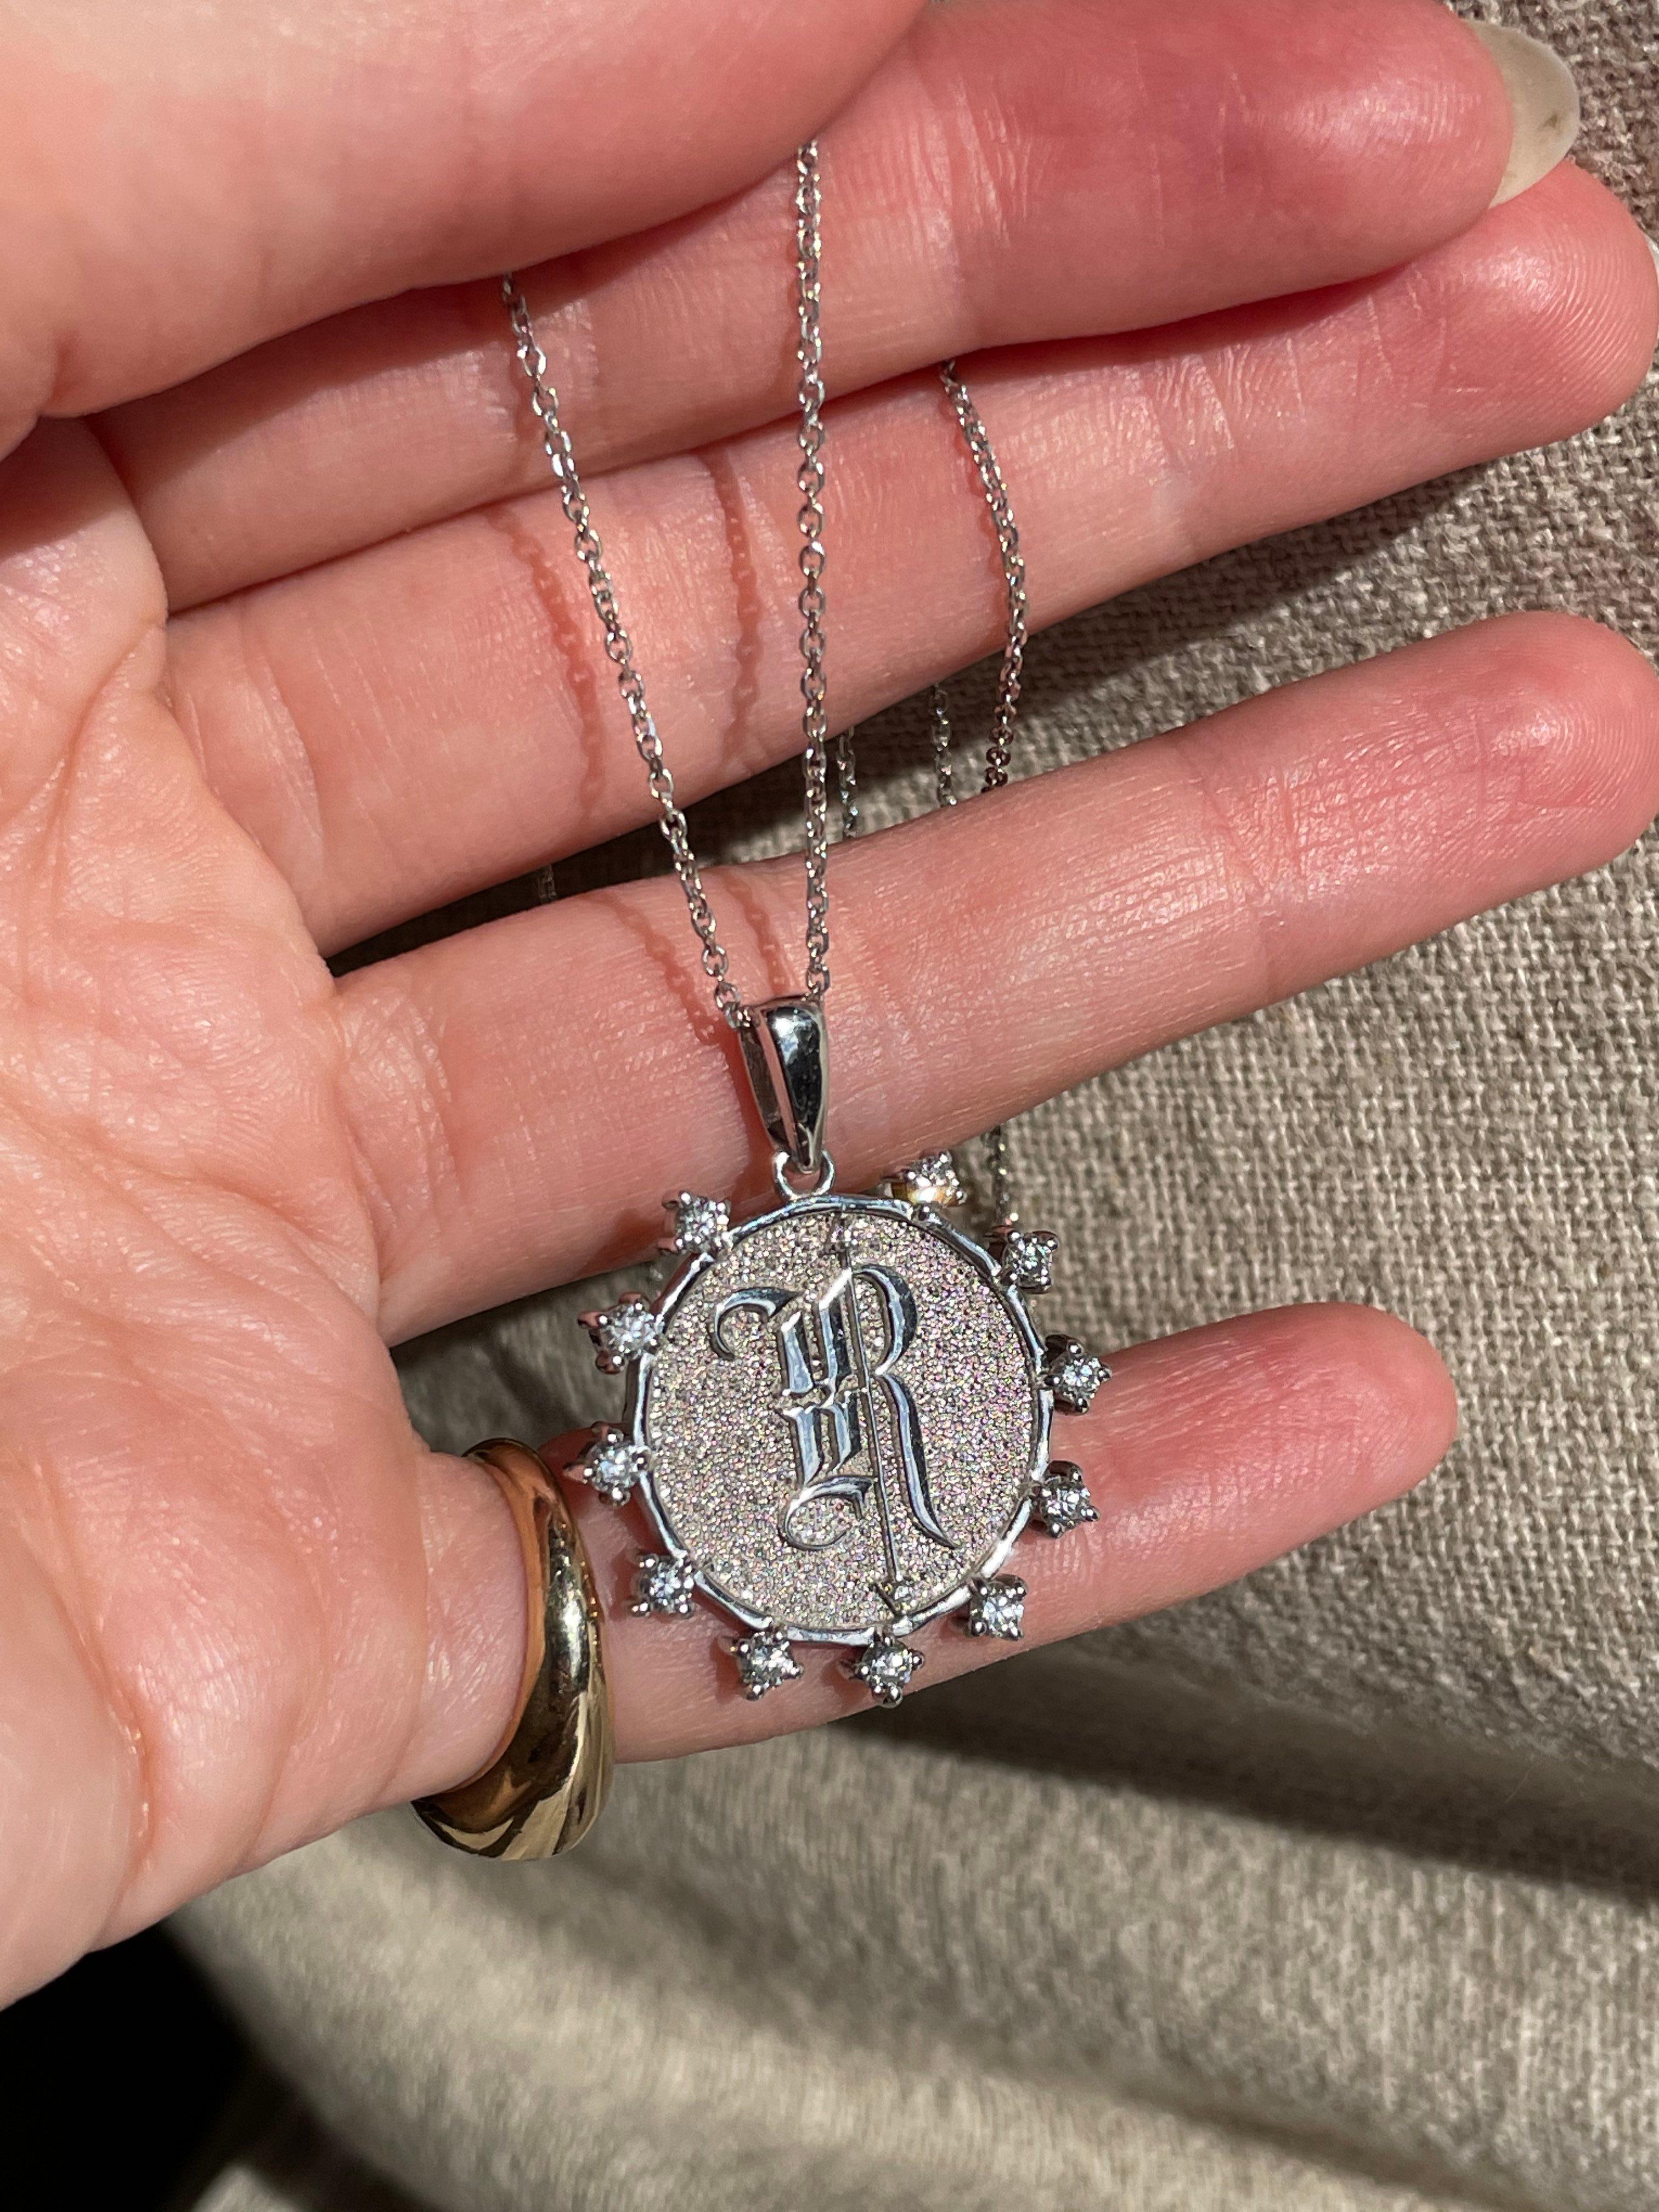 The Rune Medallion celebrates whomever you decide: state yourself or carry a loved one (or two) wherever you go. The Rune Medallion features a crown of 11 diamonds and 2 inner diamonds for over .50 total carat weight. Each Rune Medallion is